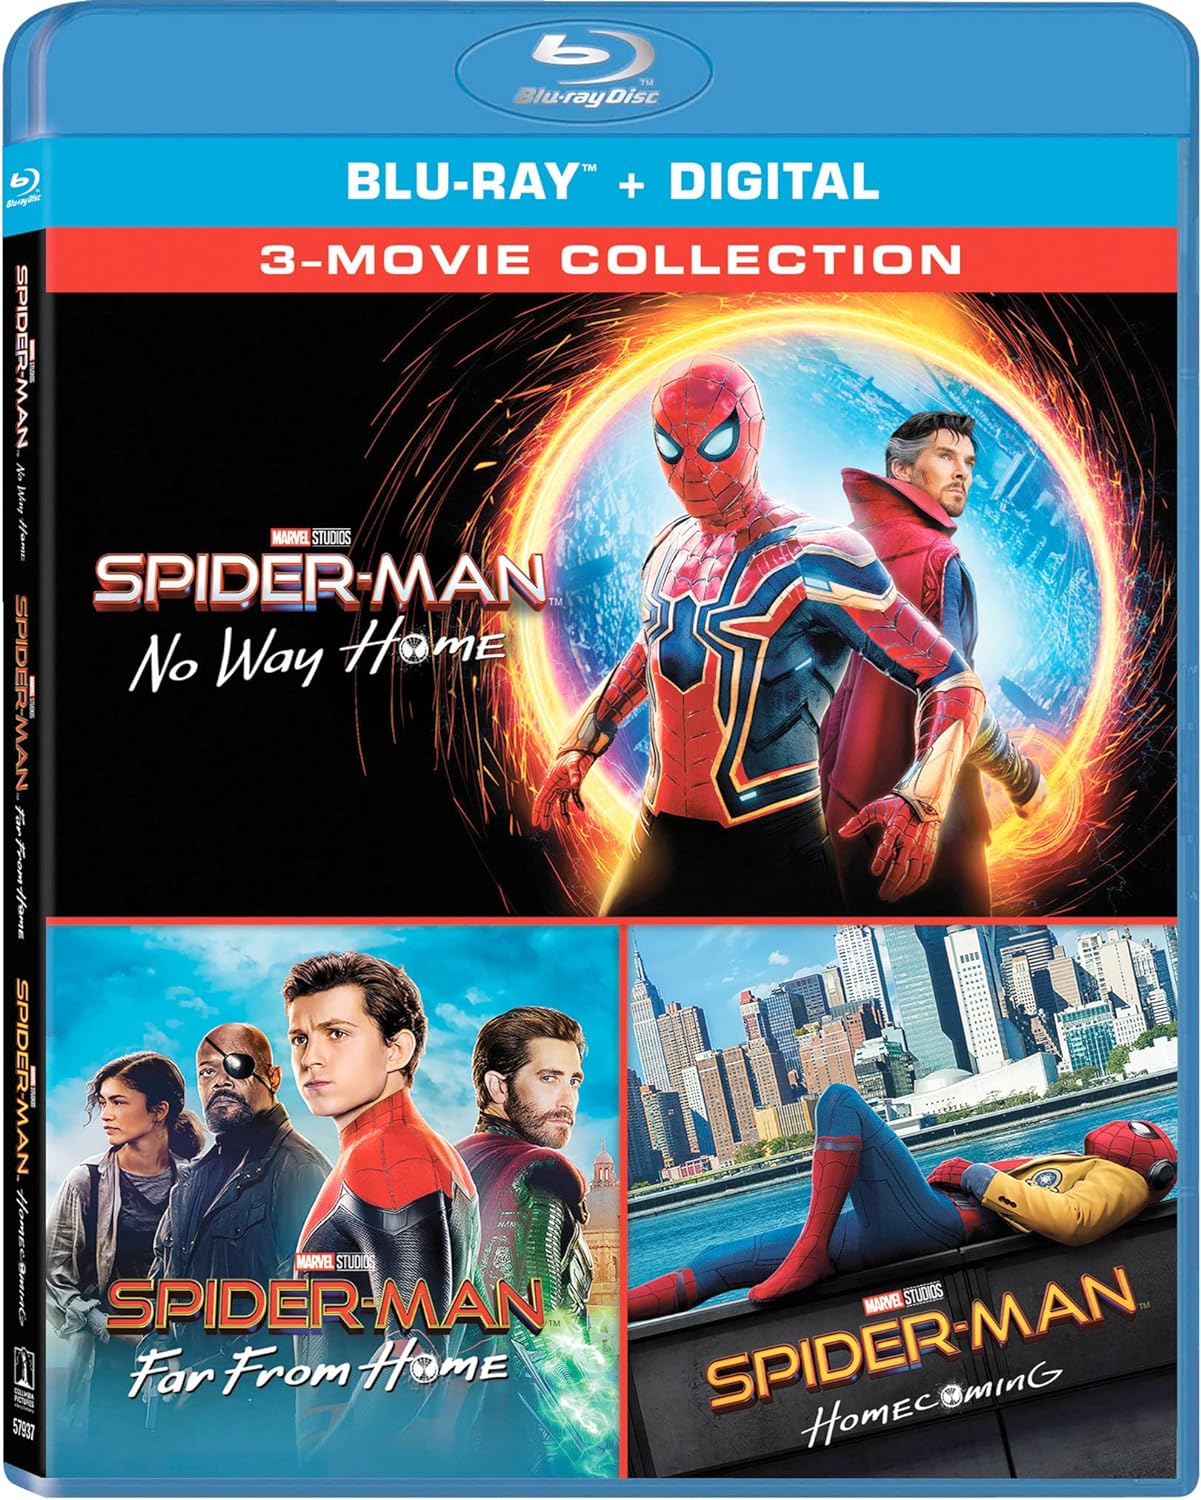 Spider-Man: Far from Home / Spider-Man: Homecoming / Spider-Man: No Way Home – Multi-Feature [Blu-ray]